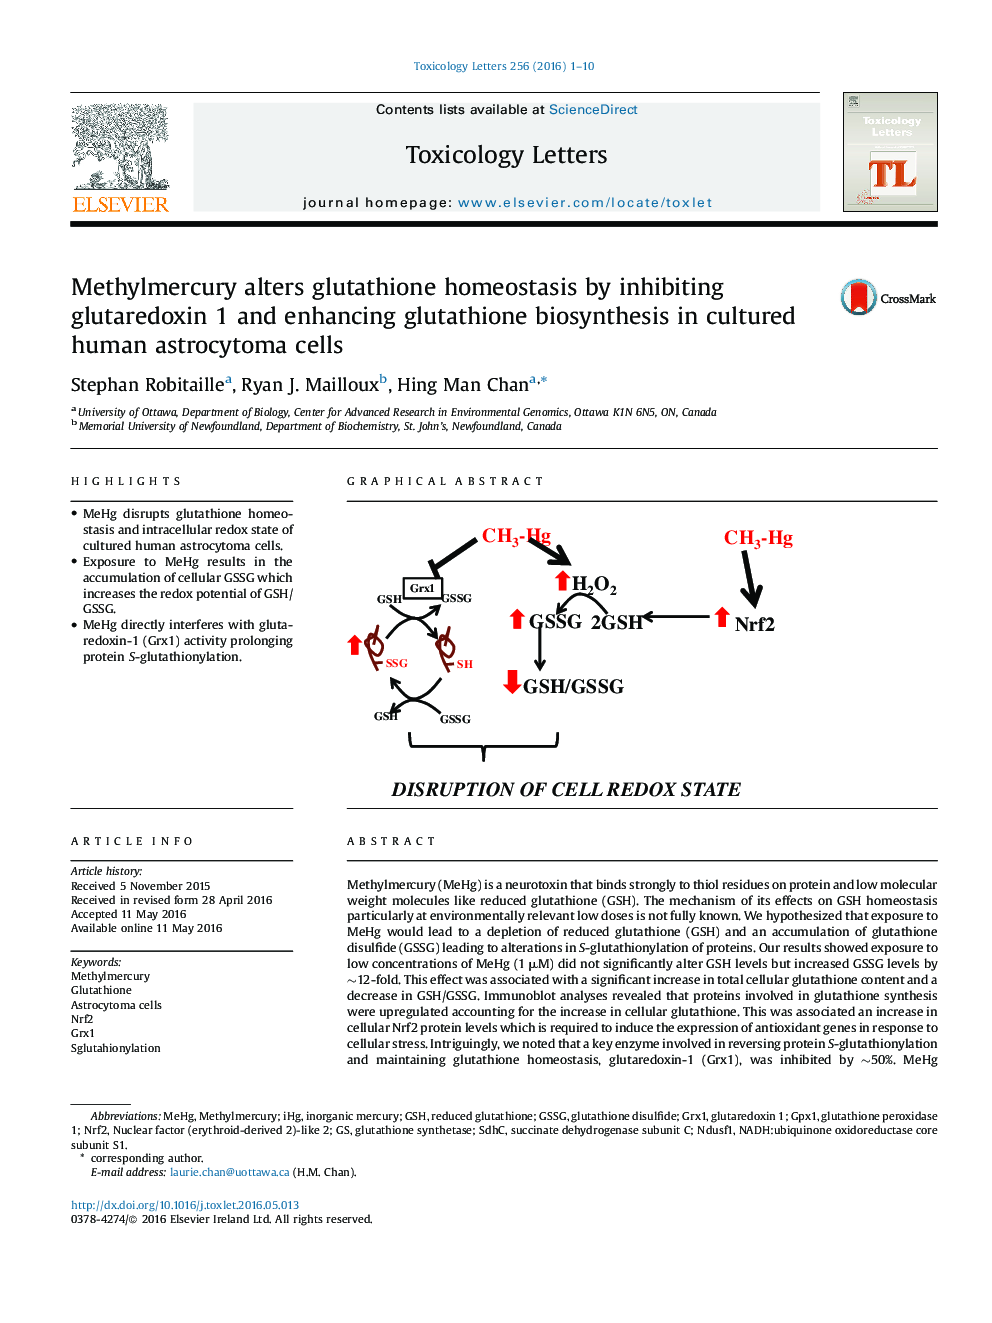 Methylmercury alters glutathione homeostasis by inhibiting glutaredoxin 1 and enhancing glutathione biosynthesis in cultured human astrocytoma cells